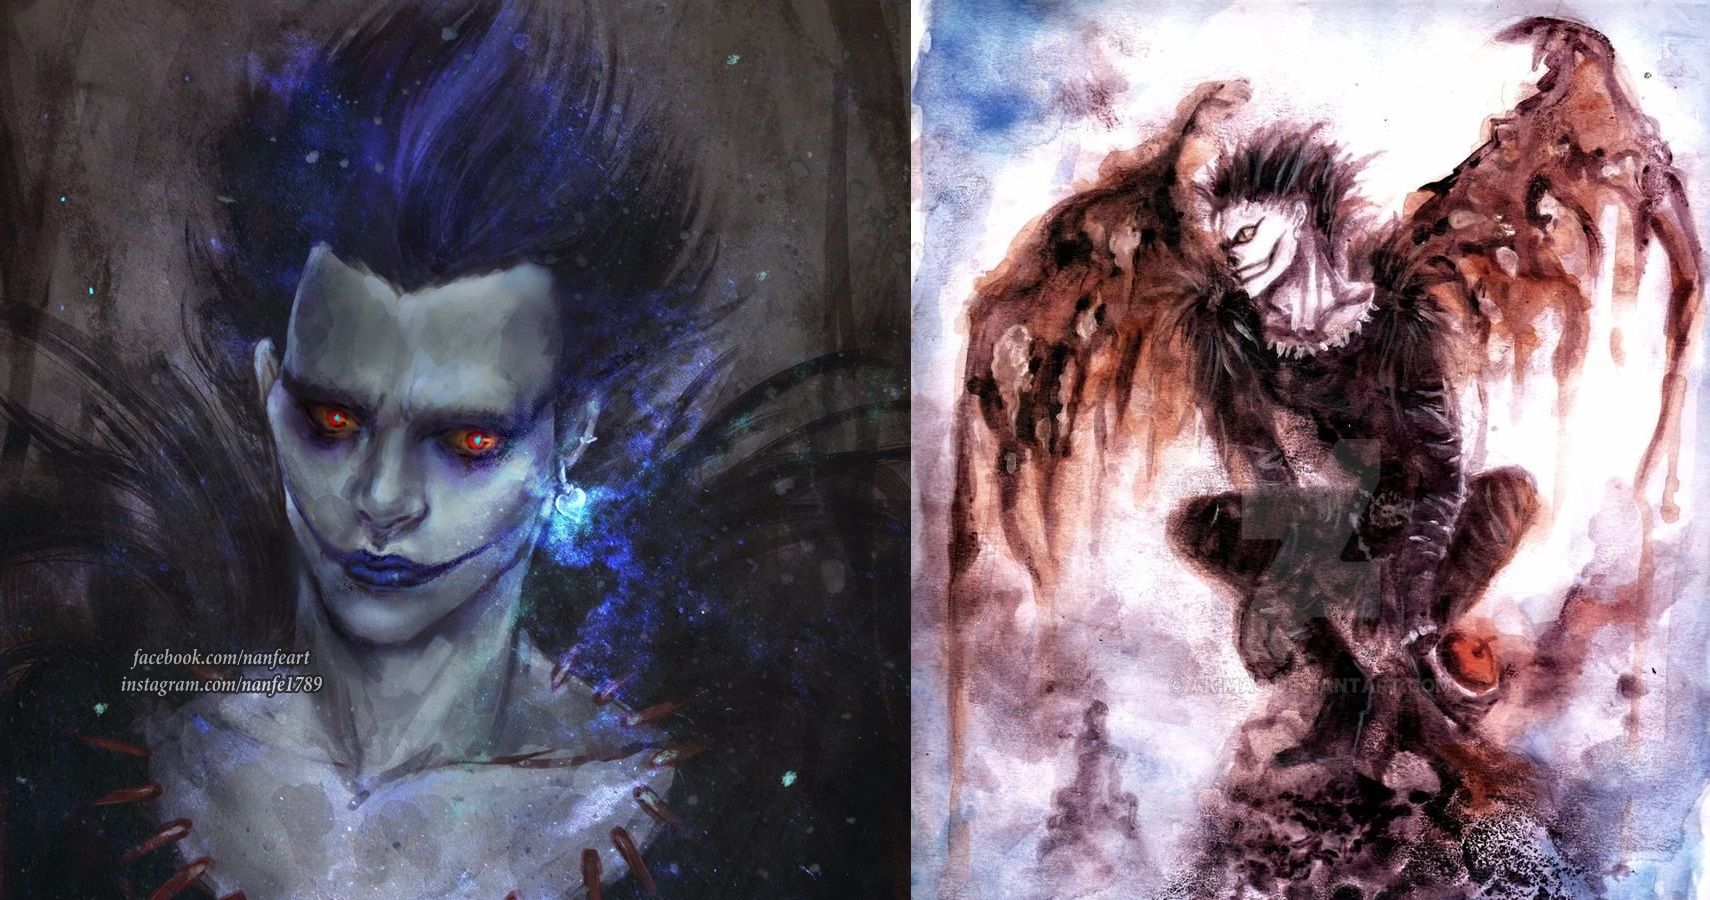 Smart Crayon - Ryuk is a antagonist in the Death Note